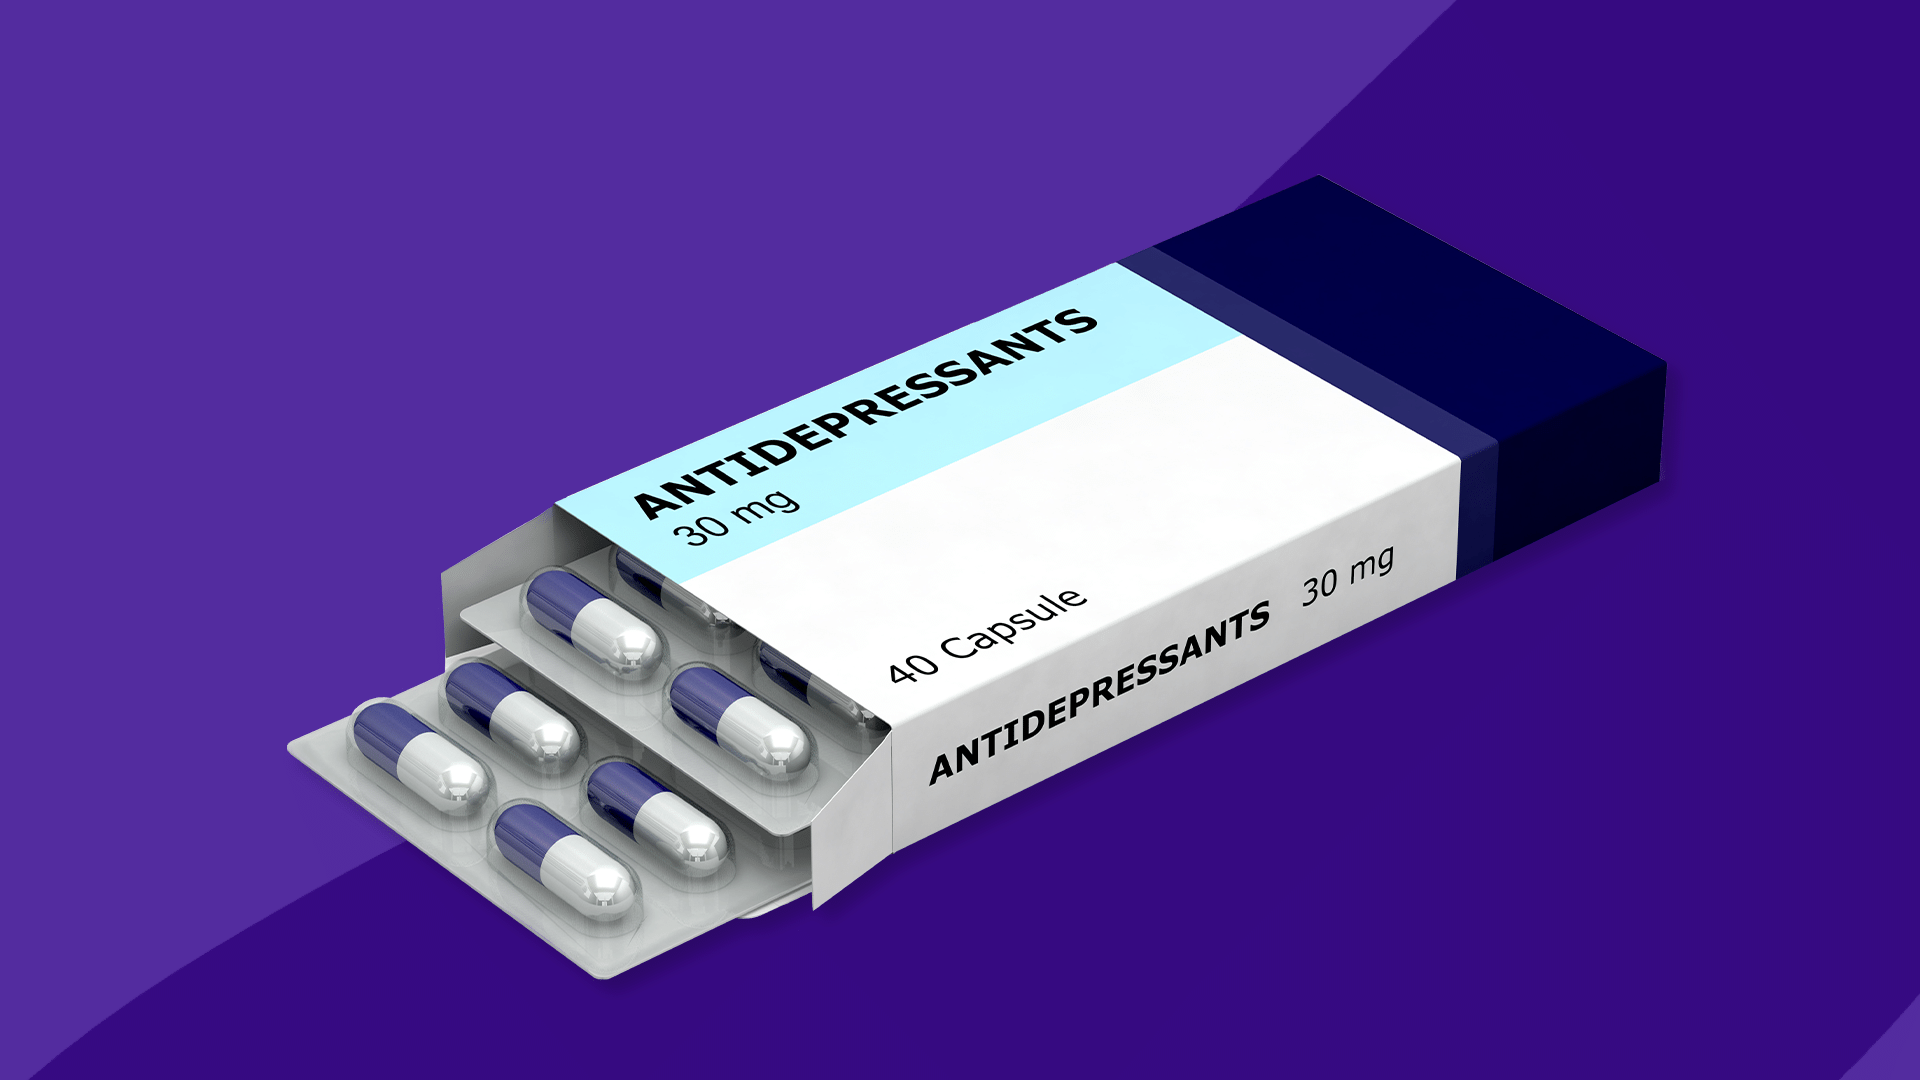 What's the best antidepressant for me?